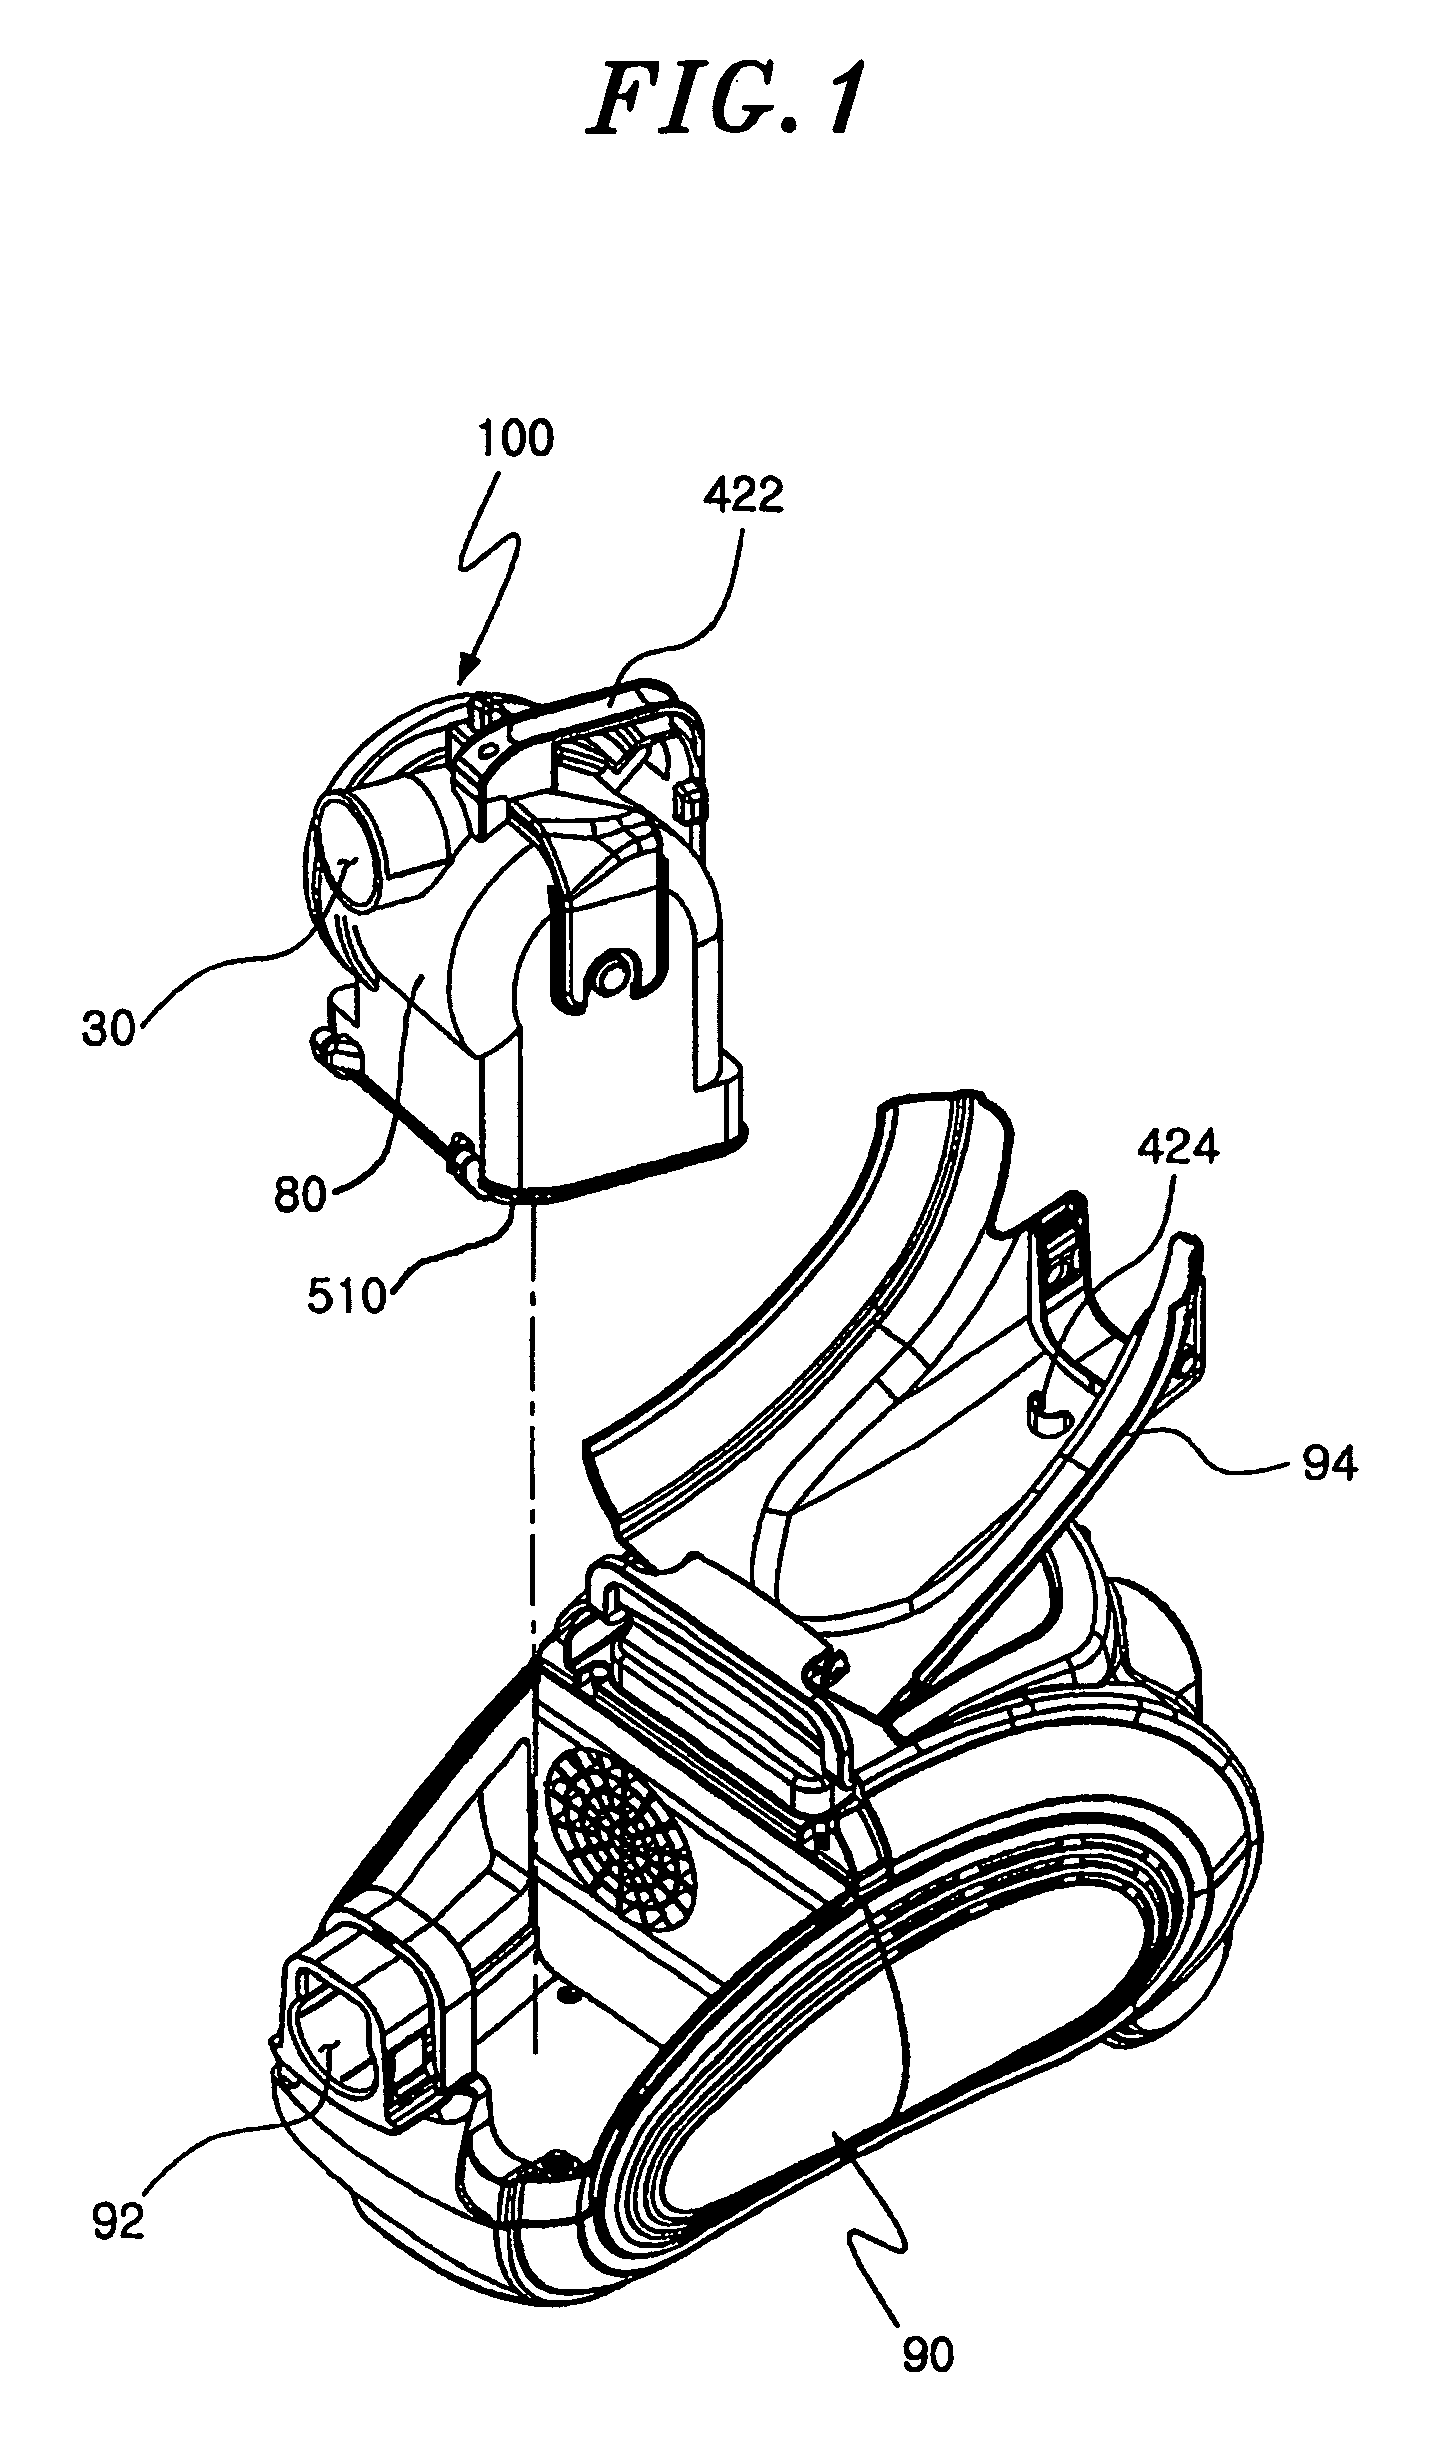 Cyclone dust collecting device for use in a vacuum cleaner